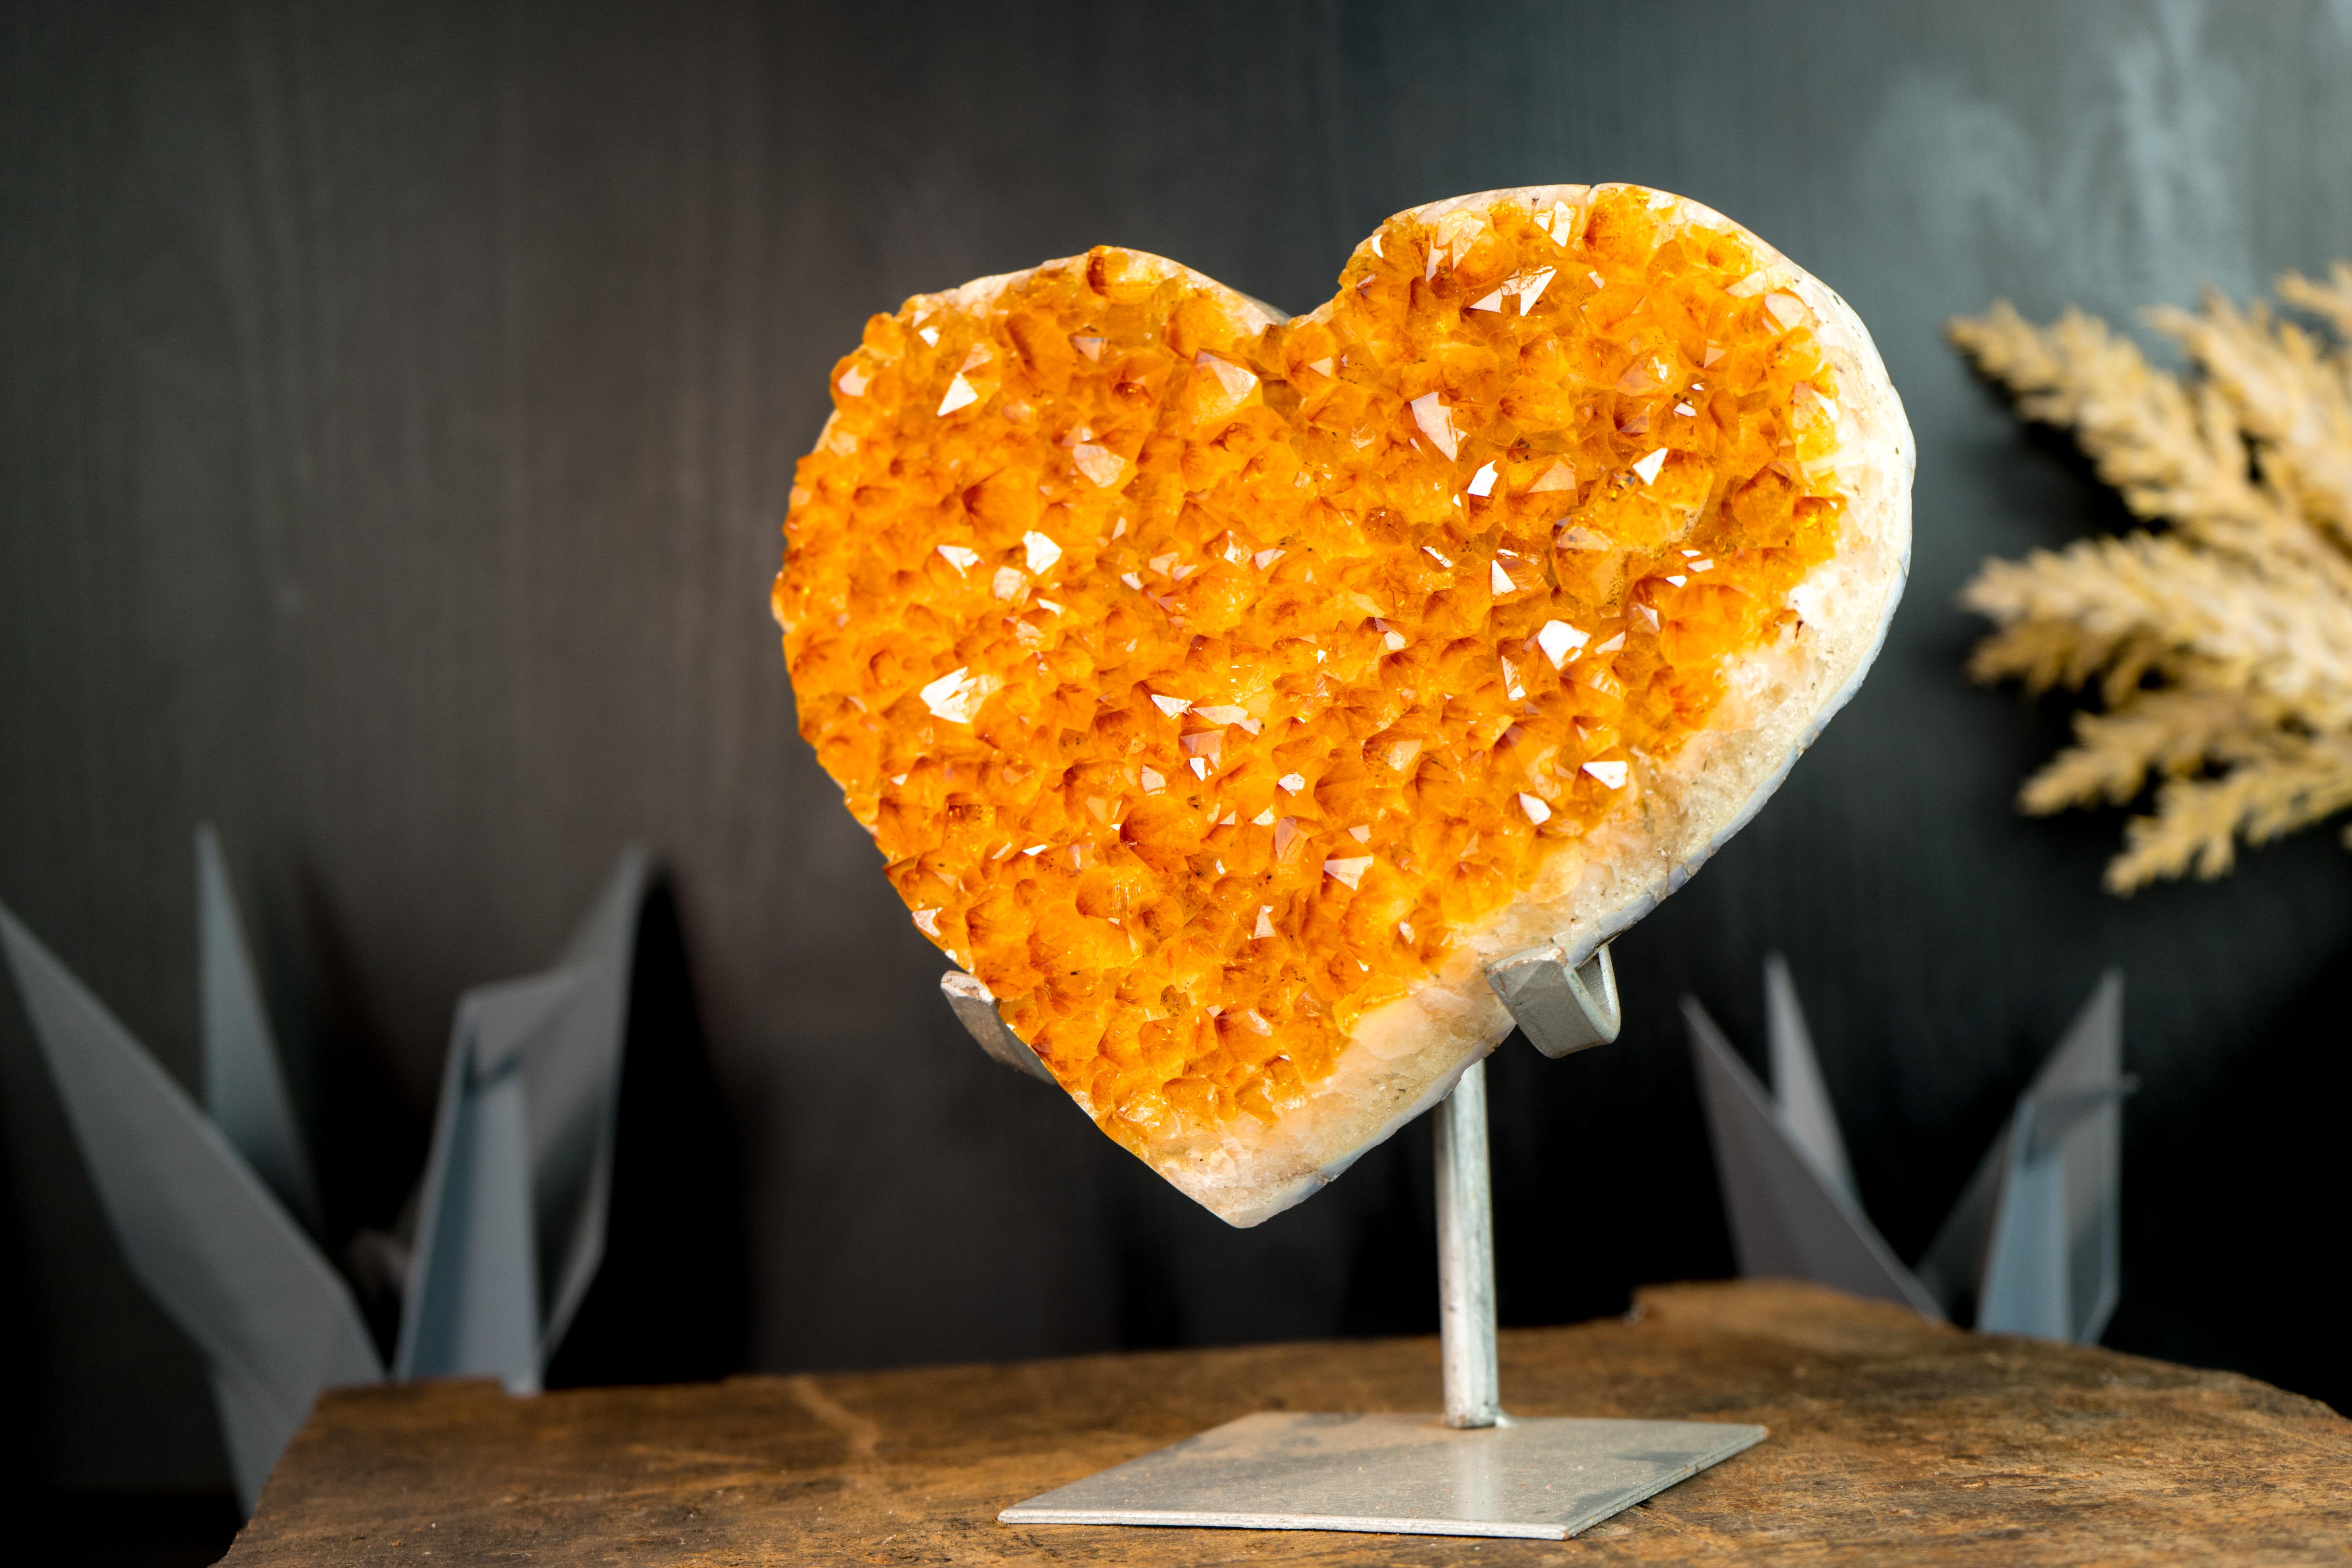 Contemporary Large Golden Orange Citrine Heart with Sparkly Extra-Grade Citrine Druzy For Sale